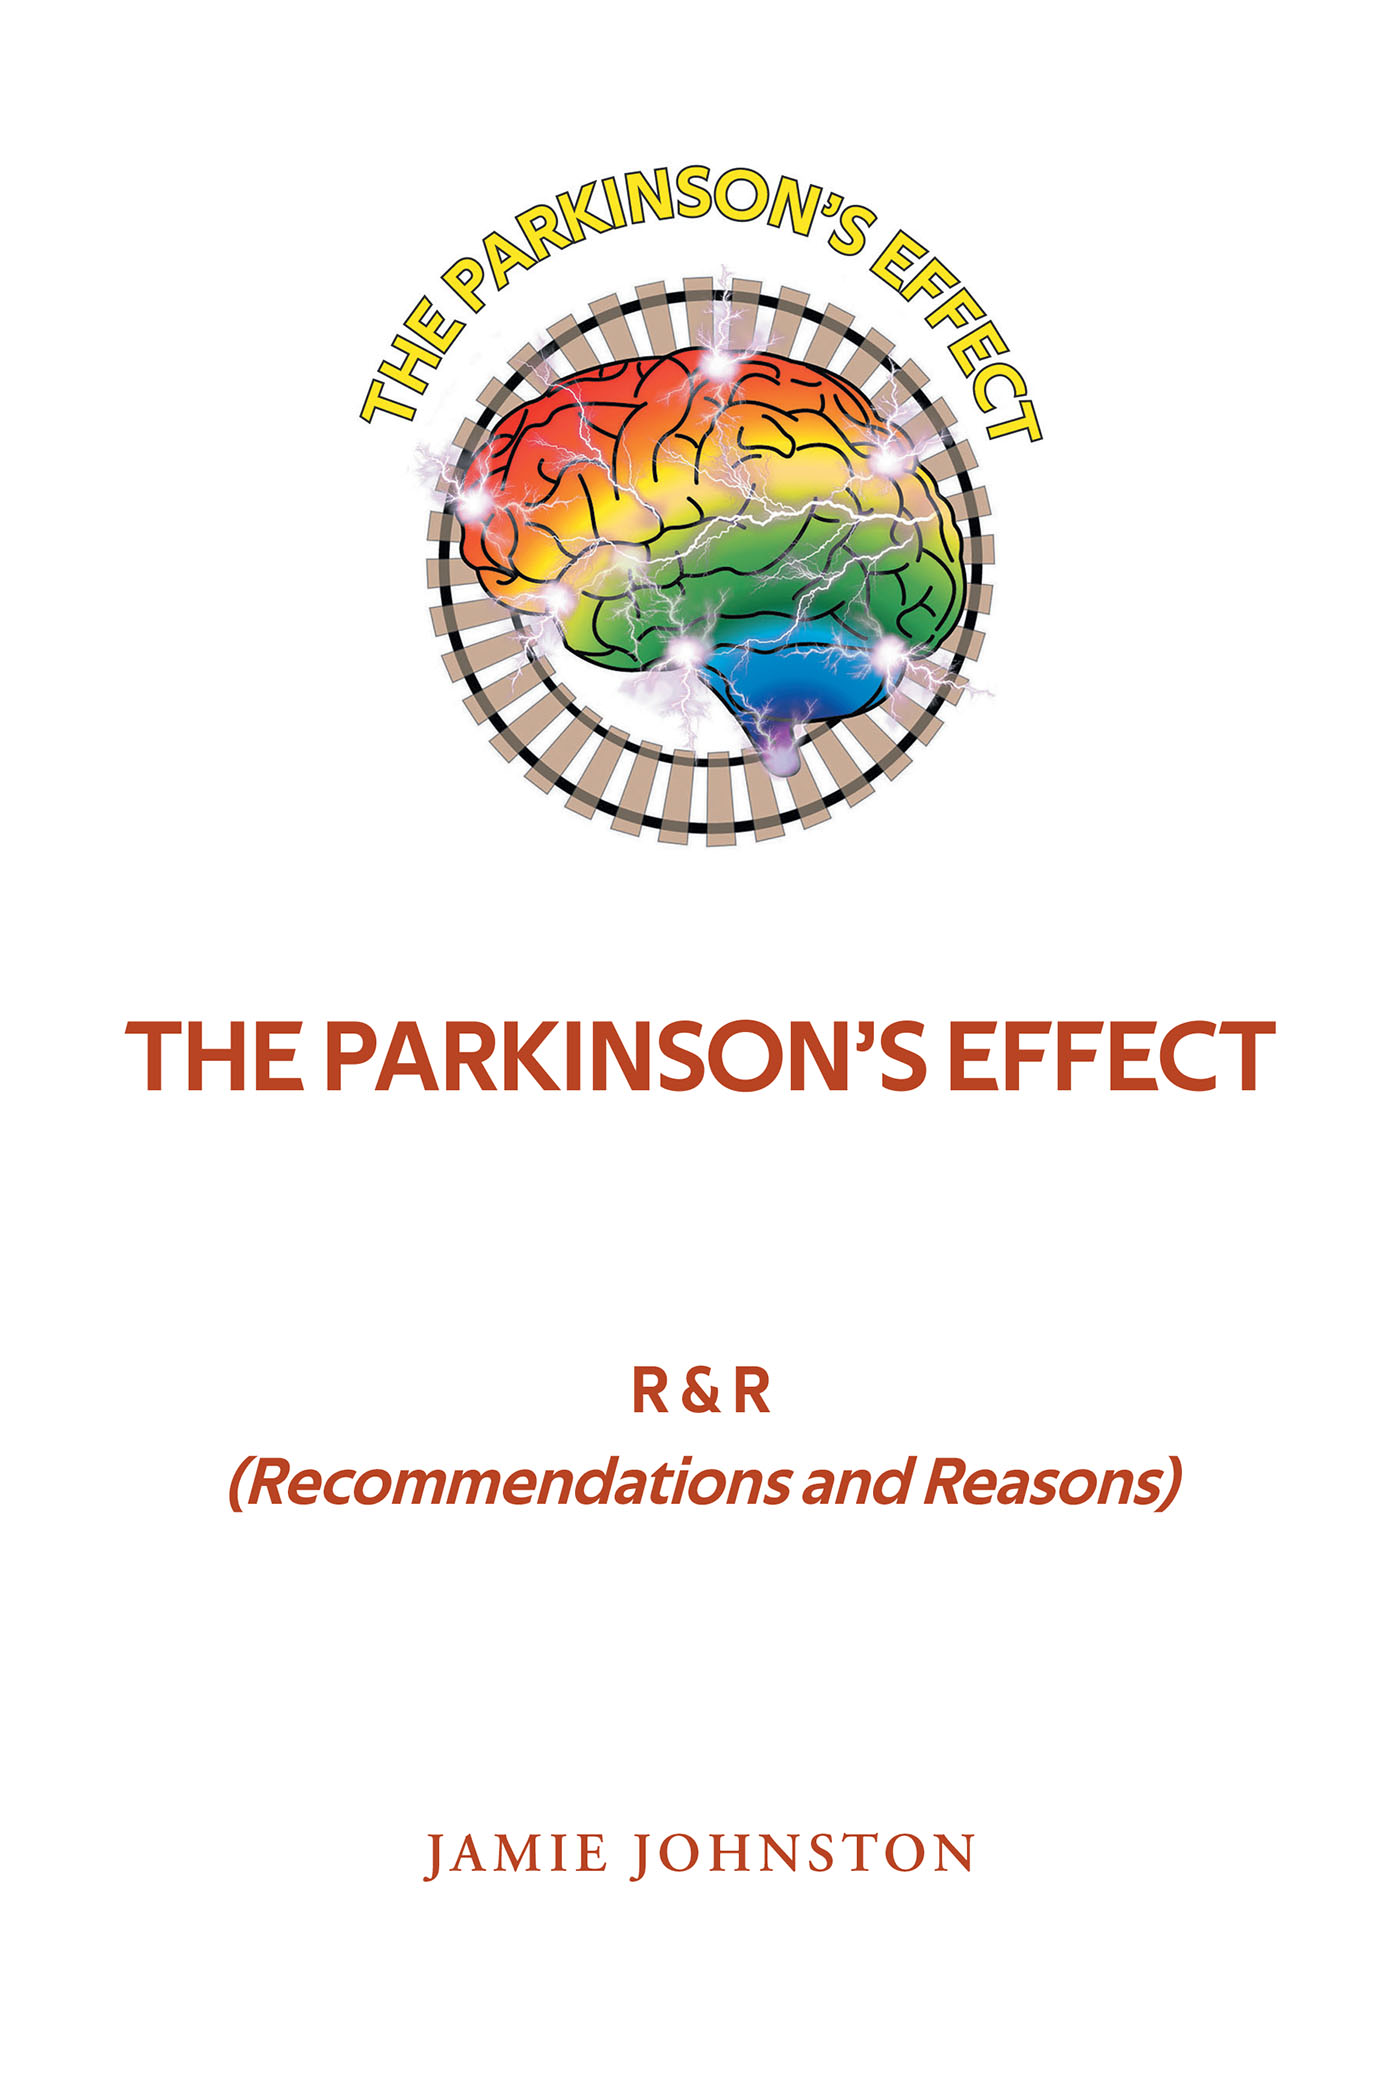 Author Jamie Johnston’s New Book, "The Parkinson's Effect," is a Collection of Information on Parkinson's That the Author Came to Know While Caring for Her Mother-in-Law